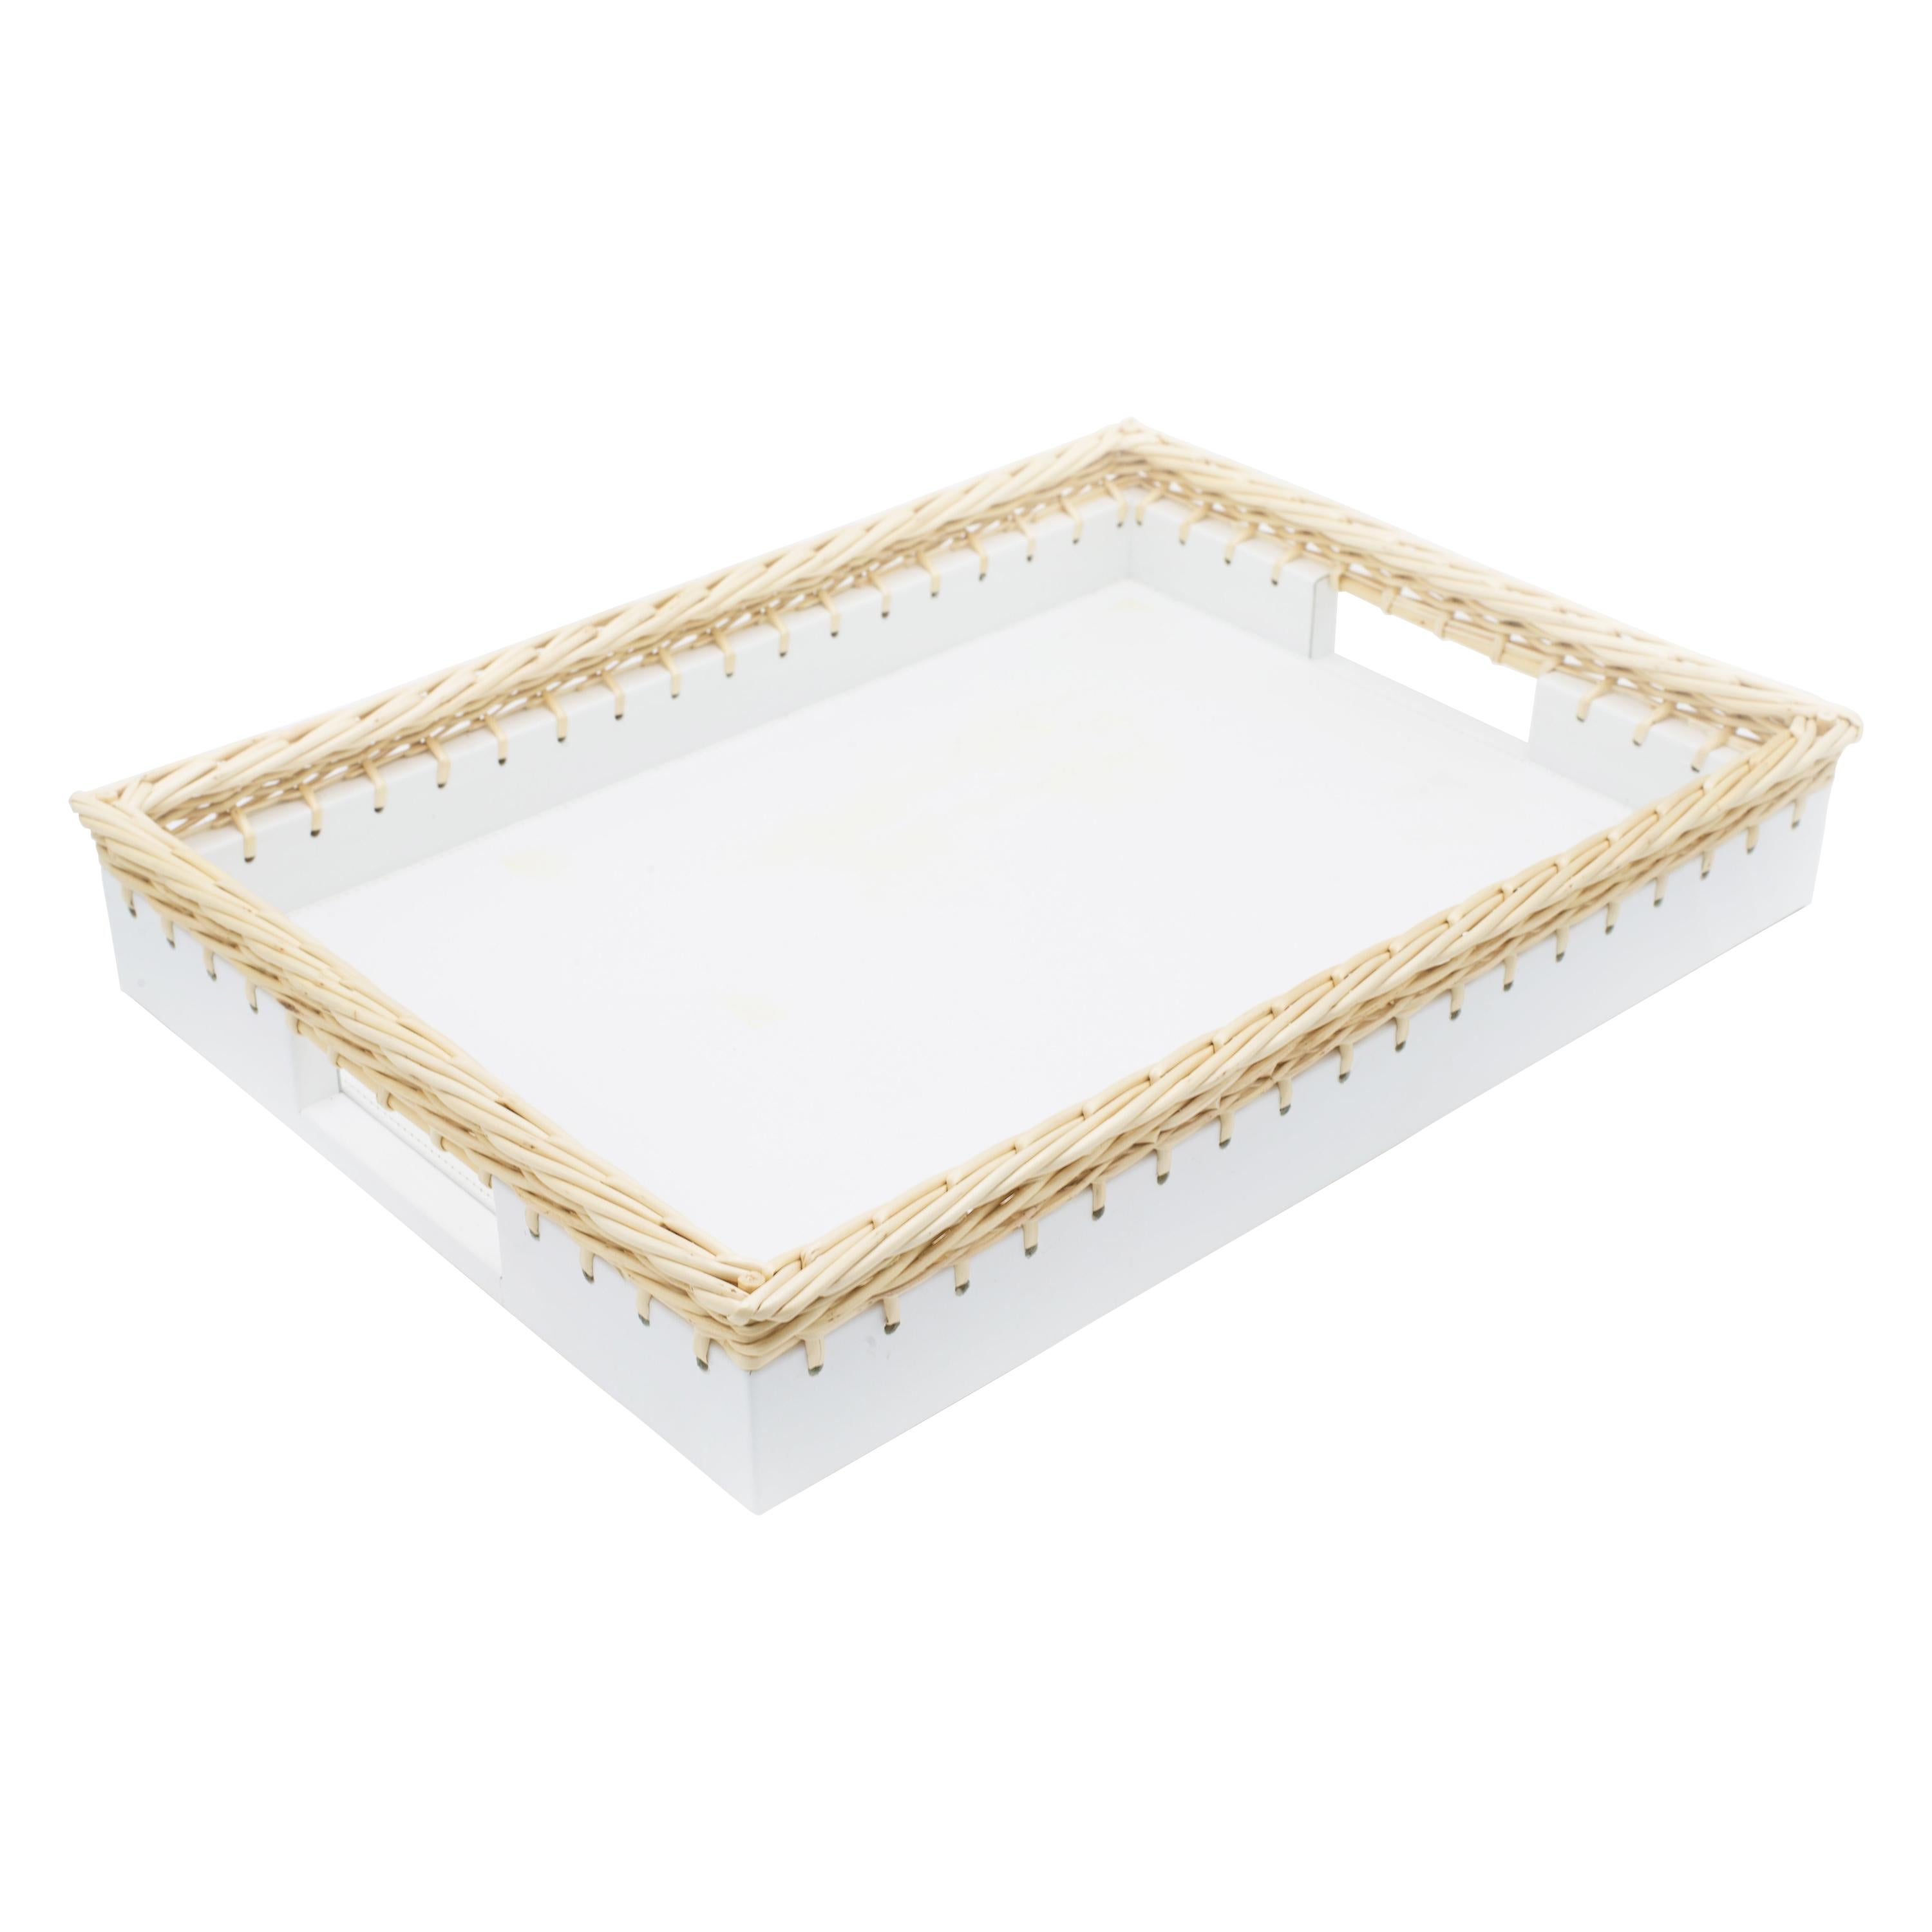 Contemporary Italian White Leather and Wicker Tray